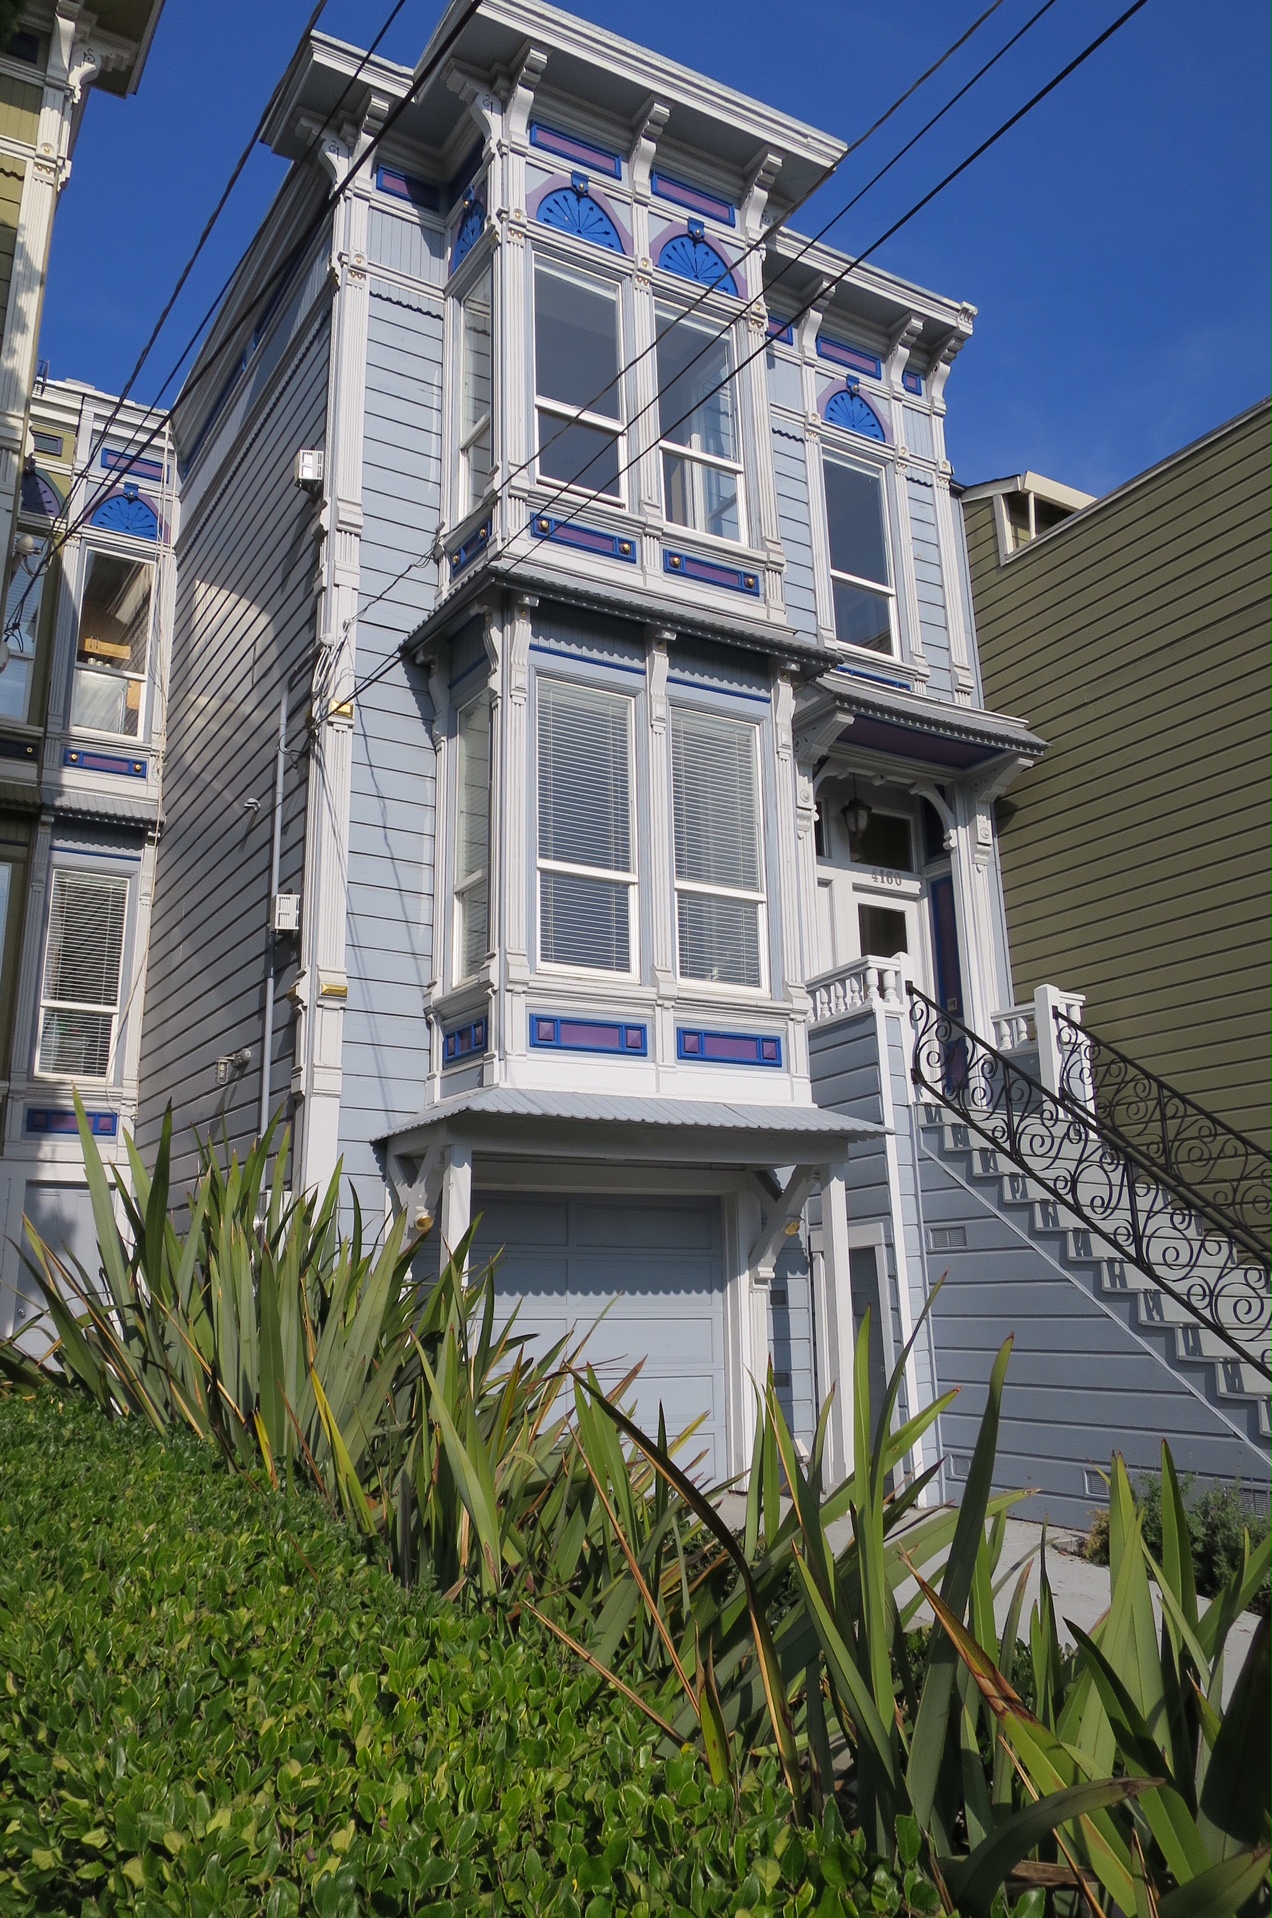 Feature photo for 4160 17th, San Francisco